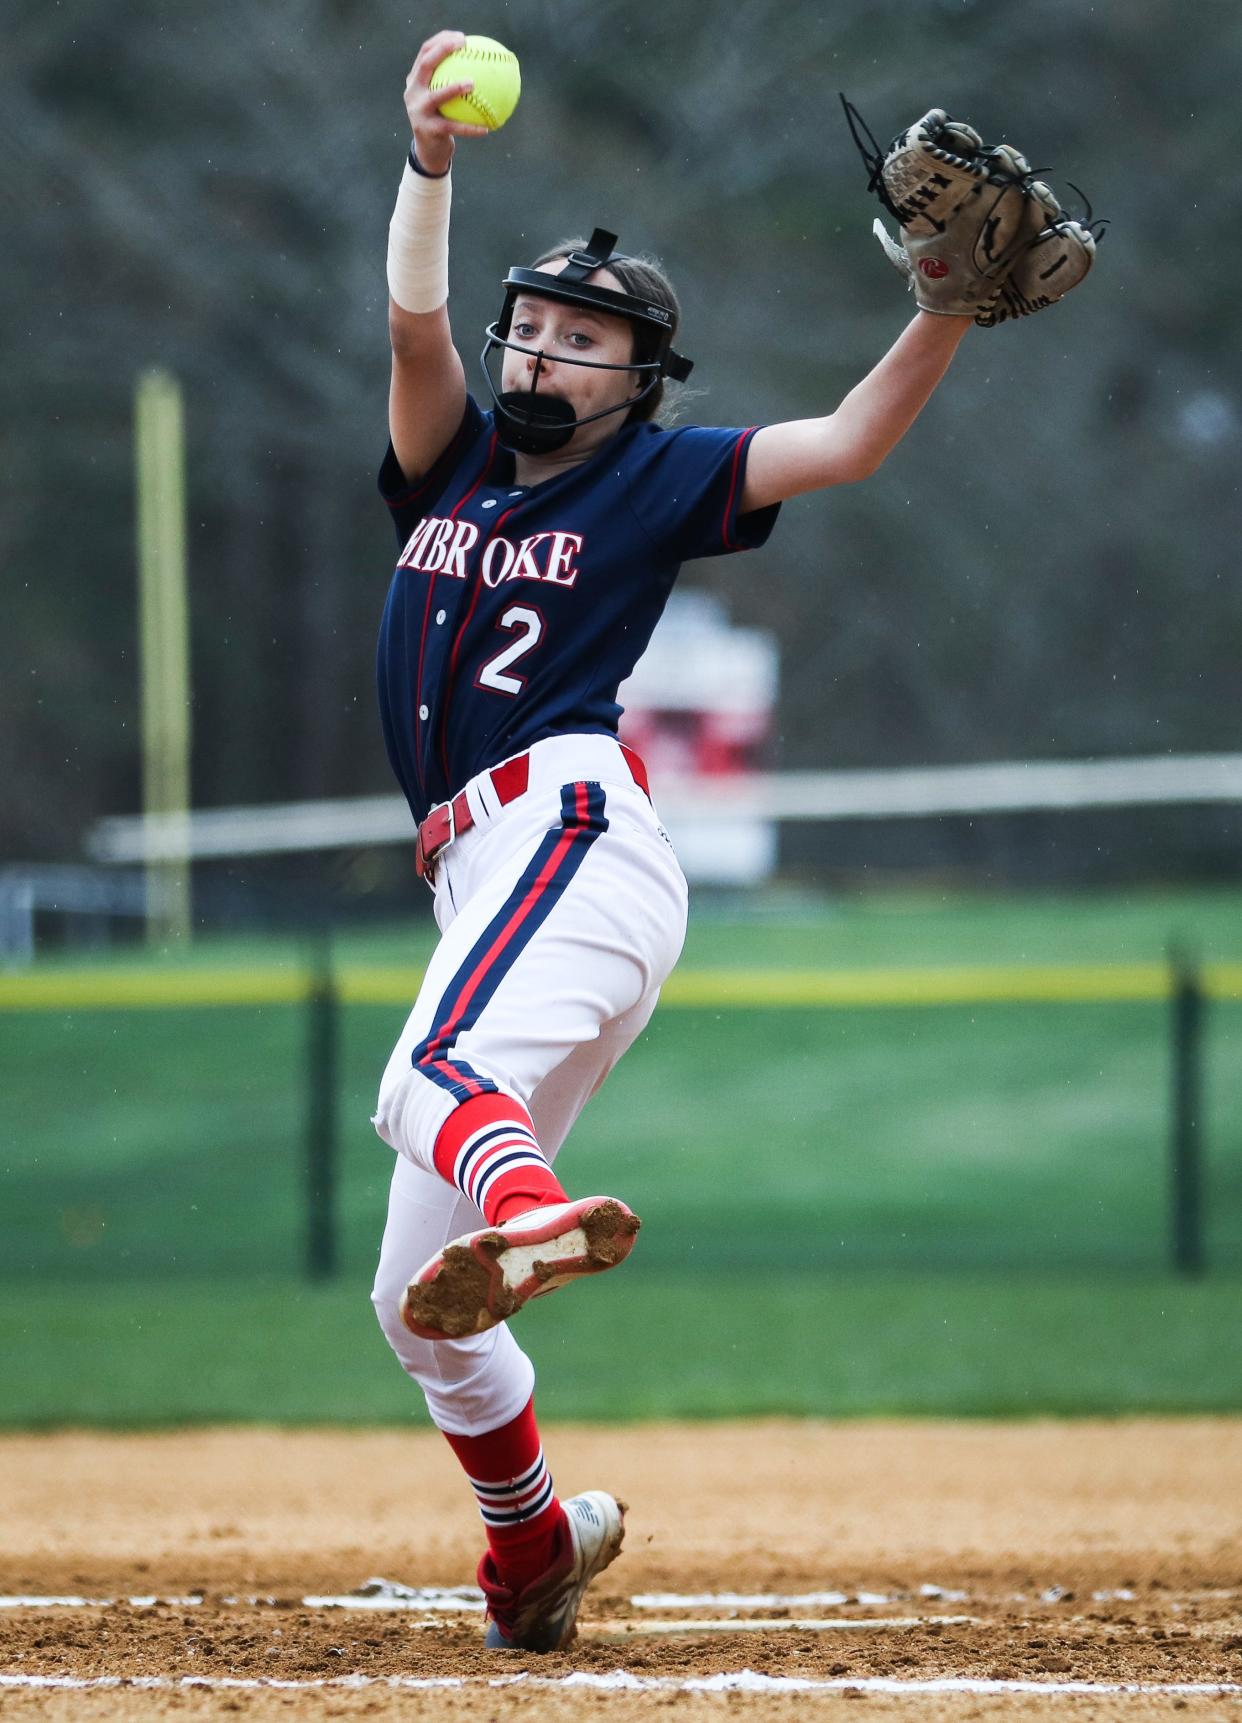 Pembroke's Kelly McGee winds up during a game against Silver Lake on Monday, May 2, 2022.